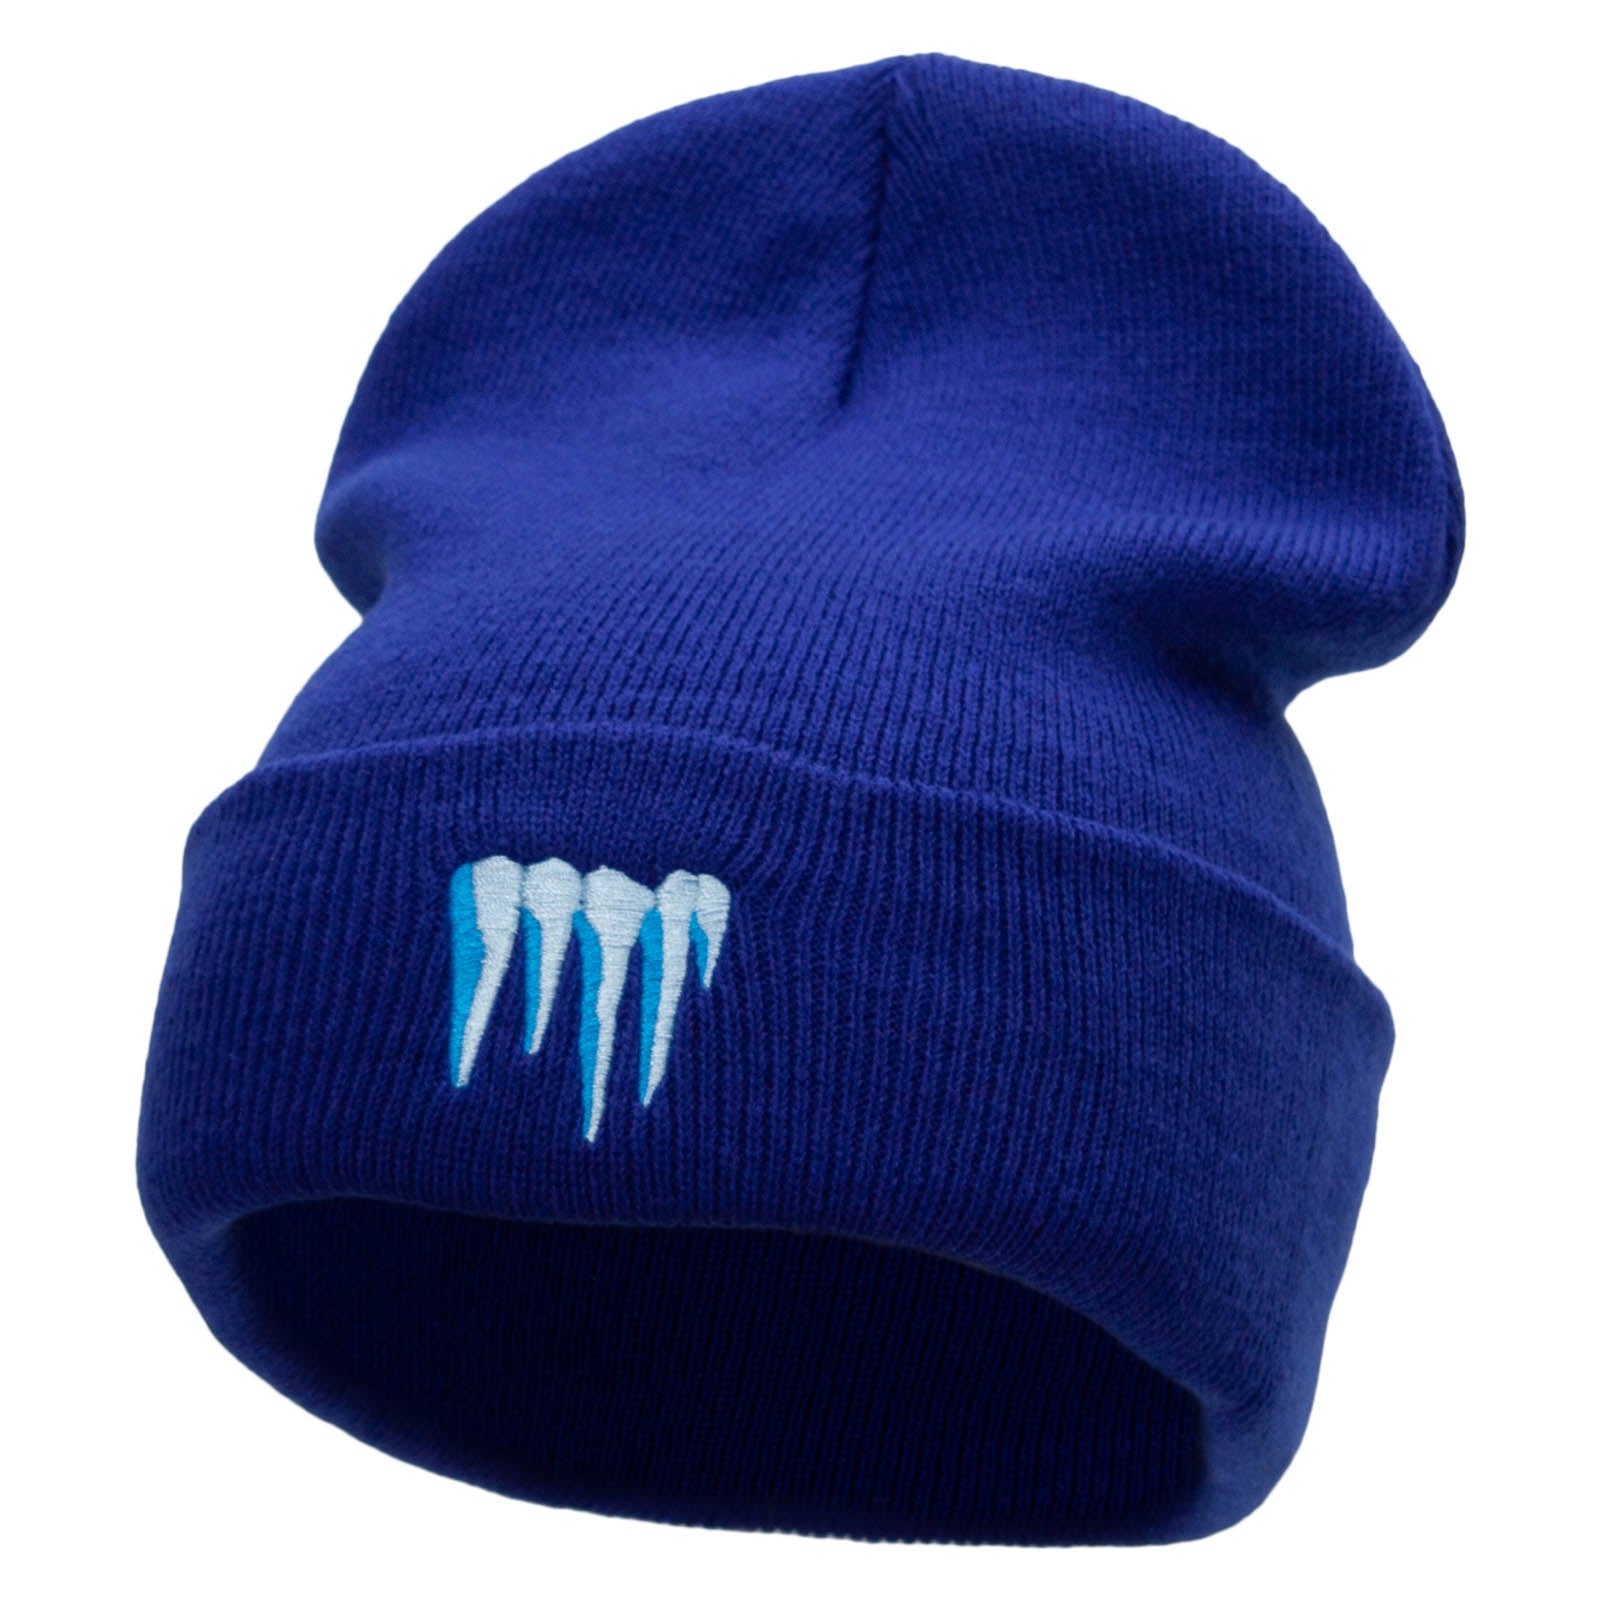 Frozen Ice Embroidered 12 Inch Long Knitted Beanie - Royal OSFM